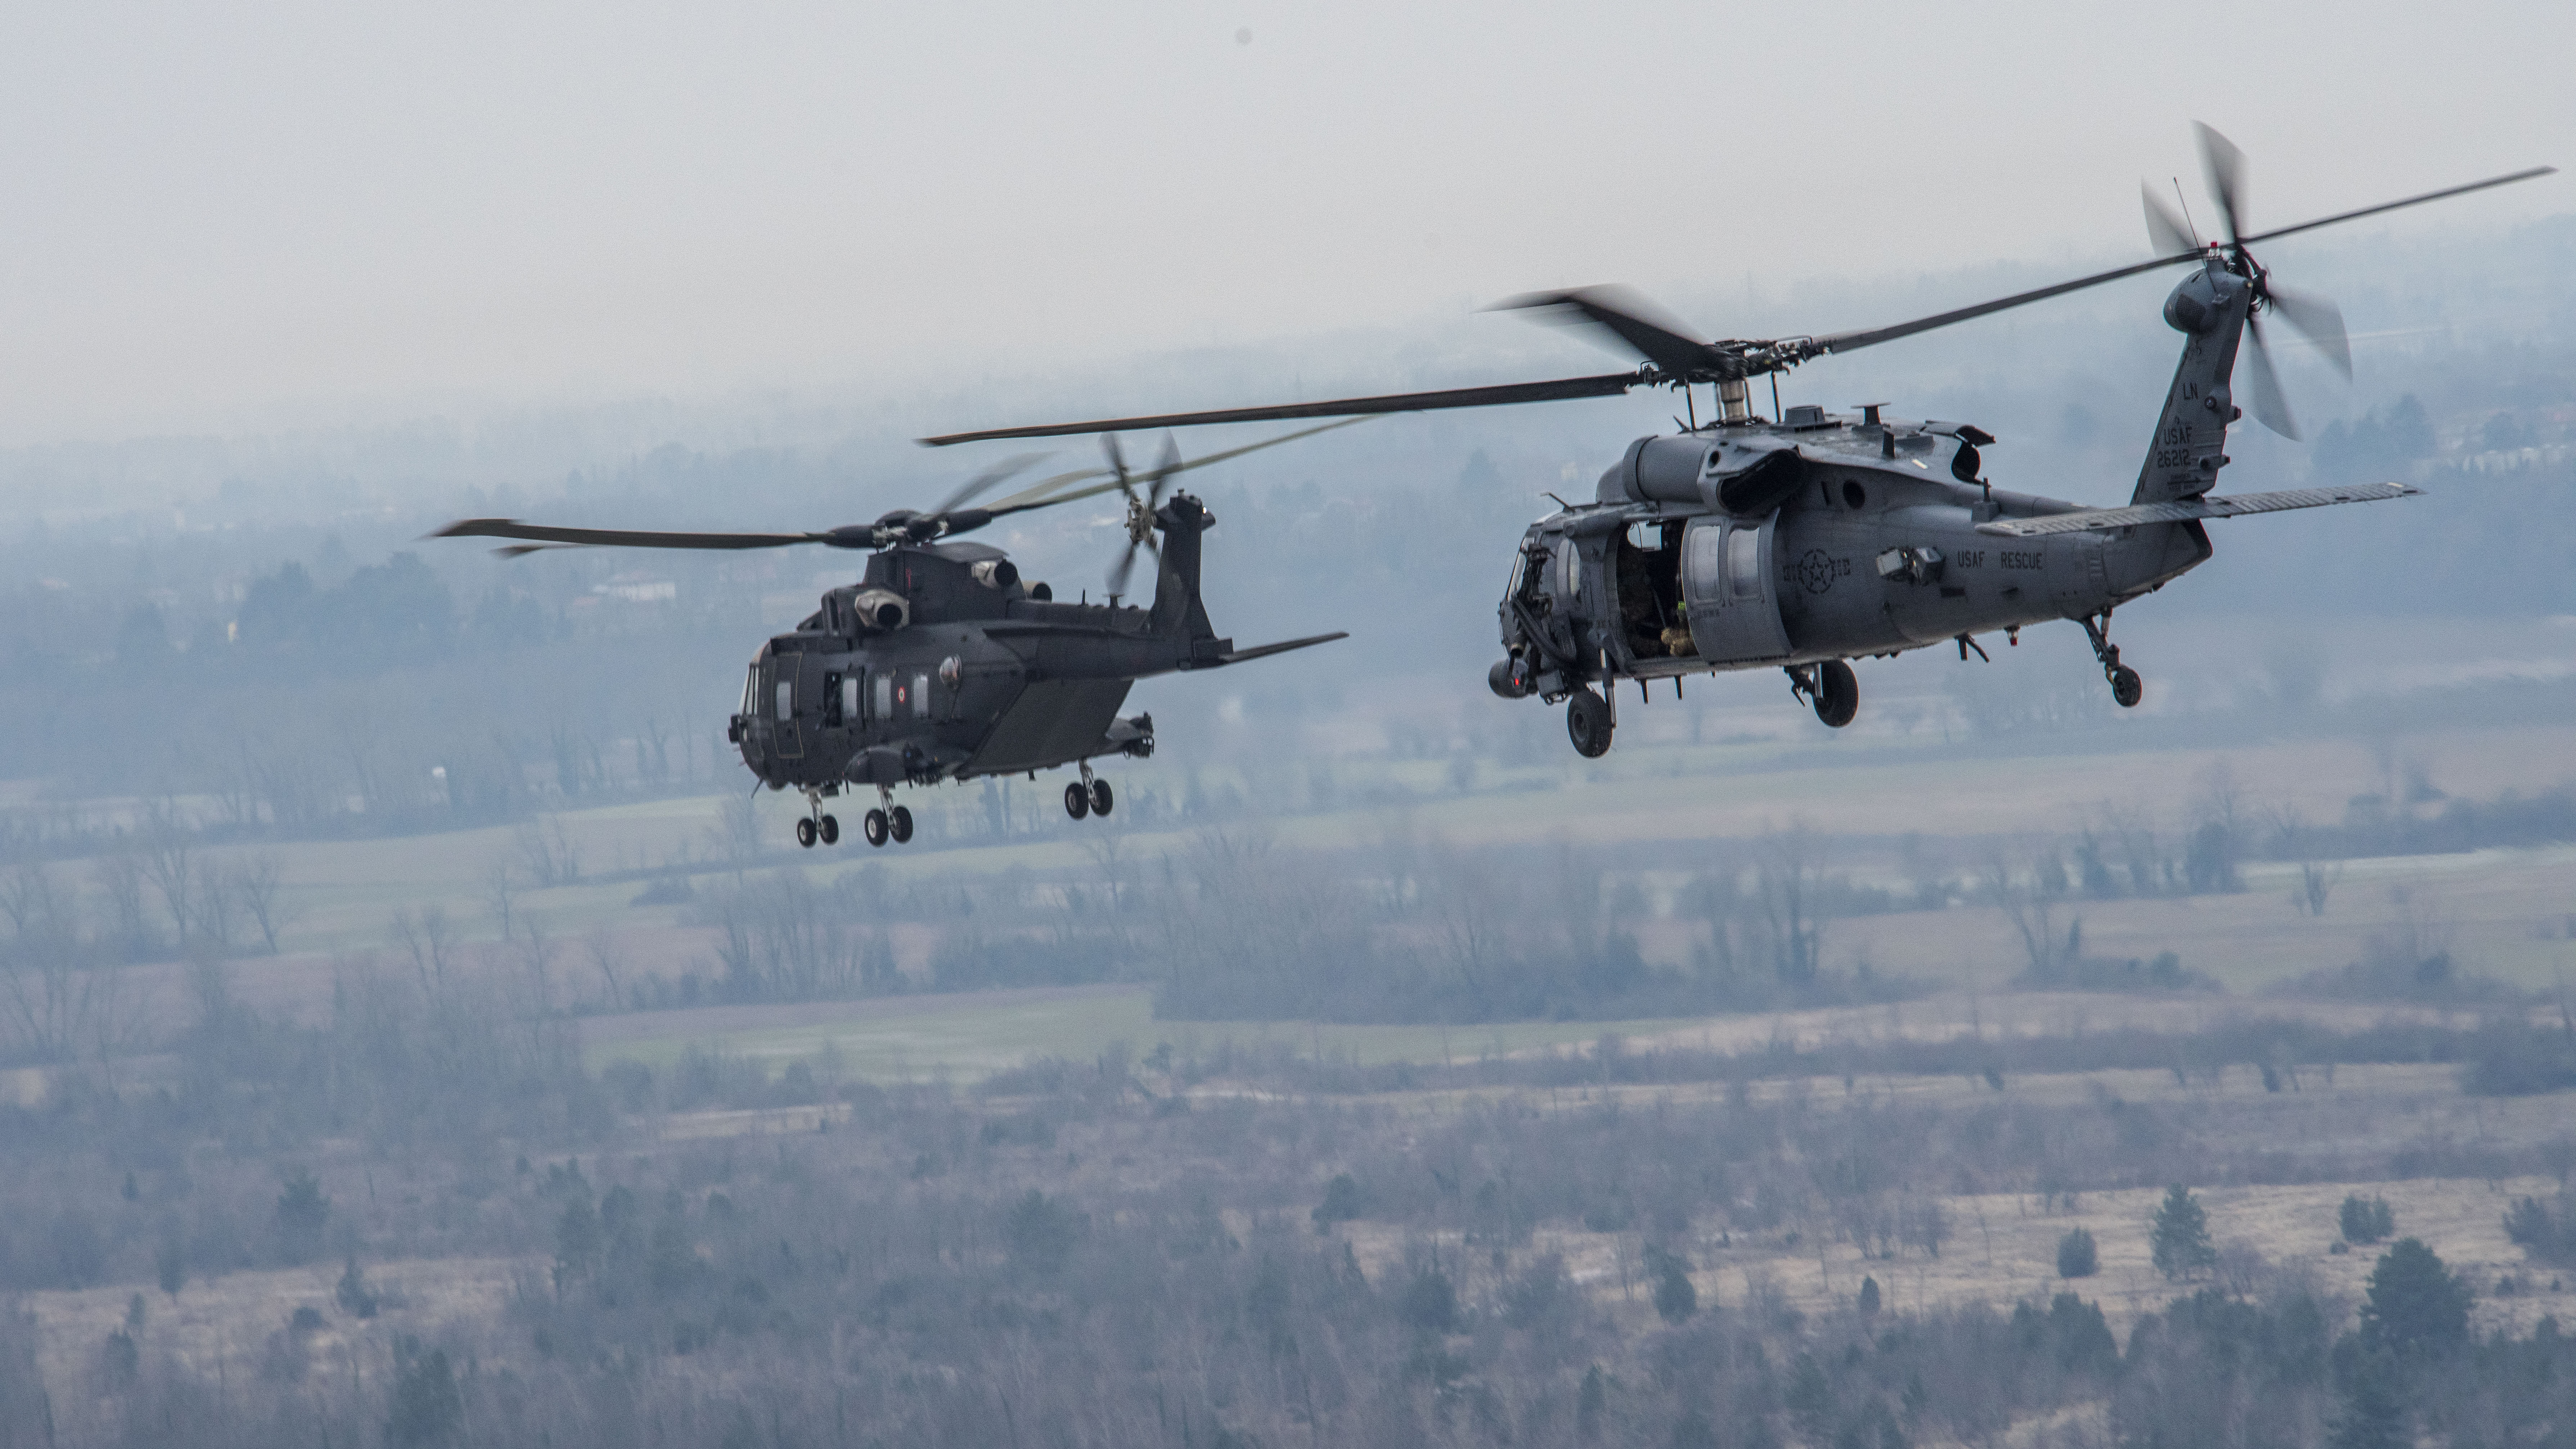 Two HH-60 helicopters flying